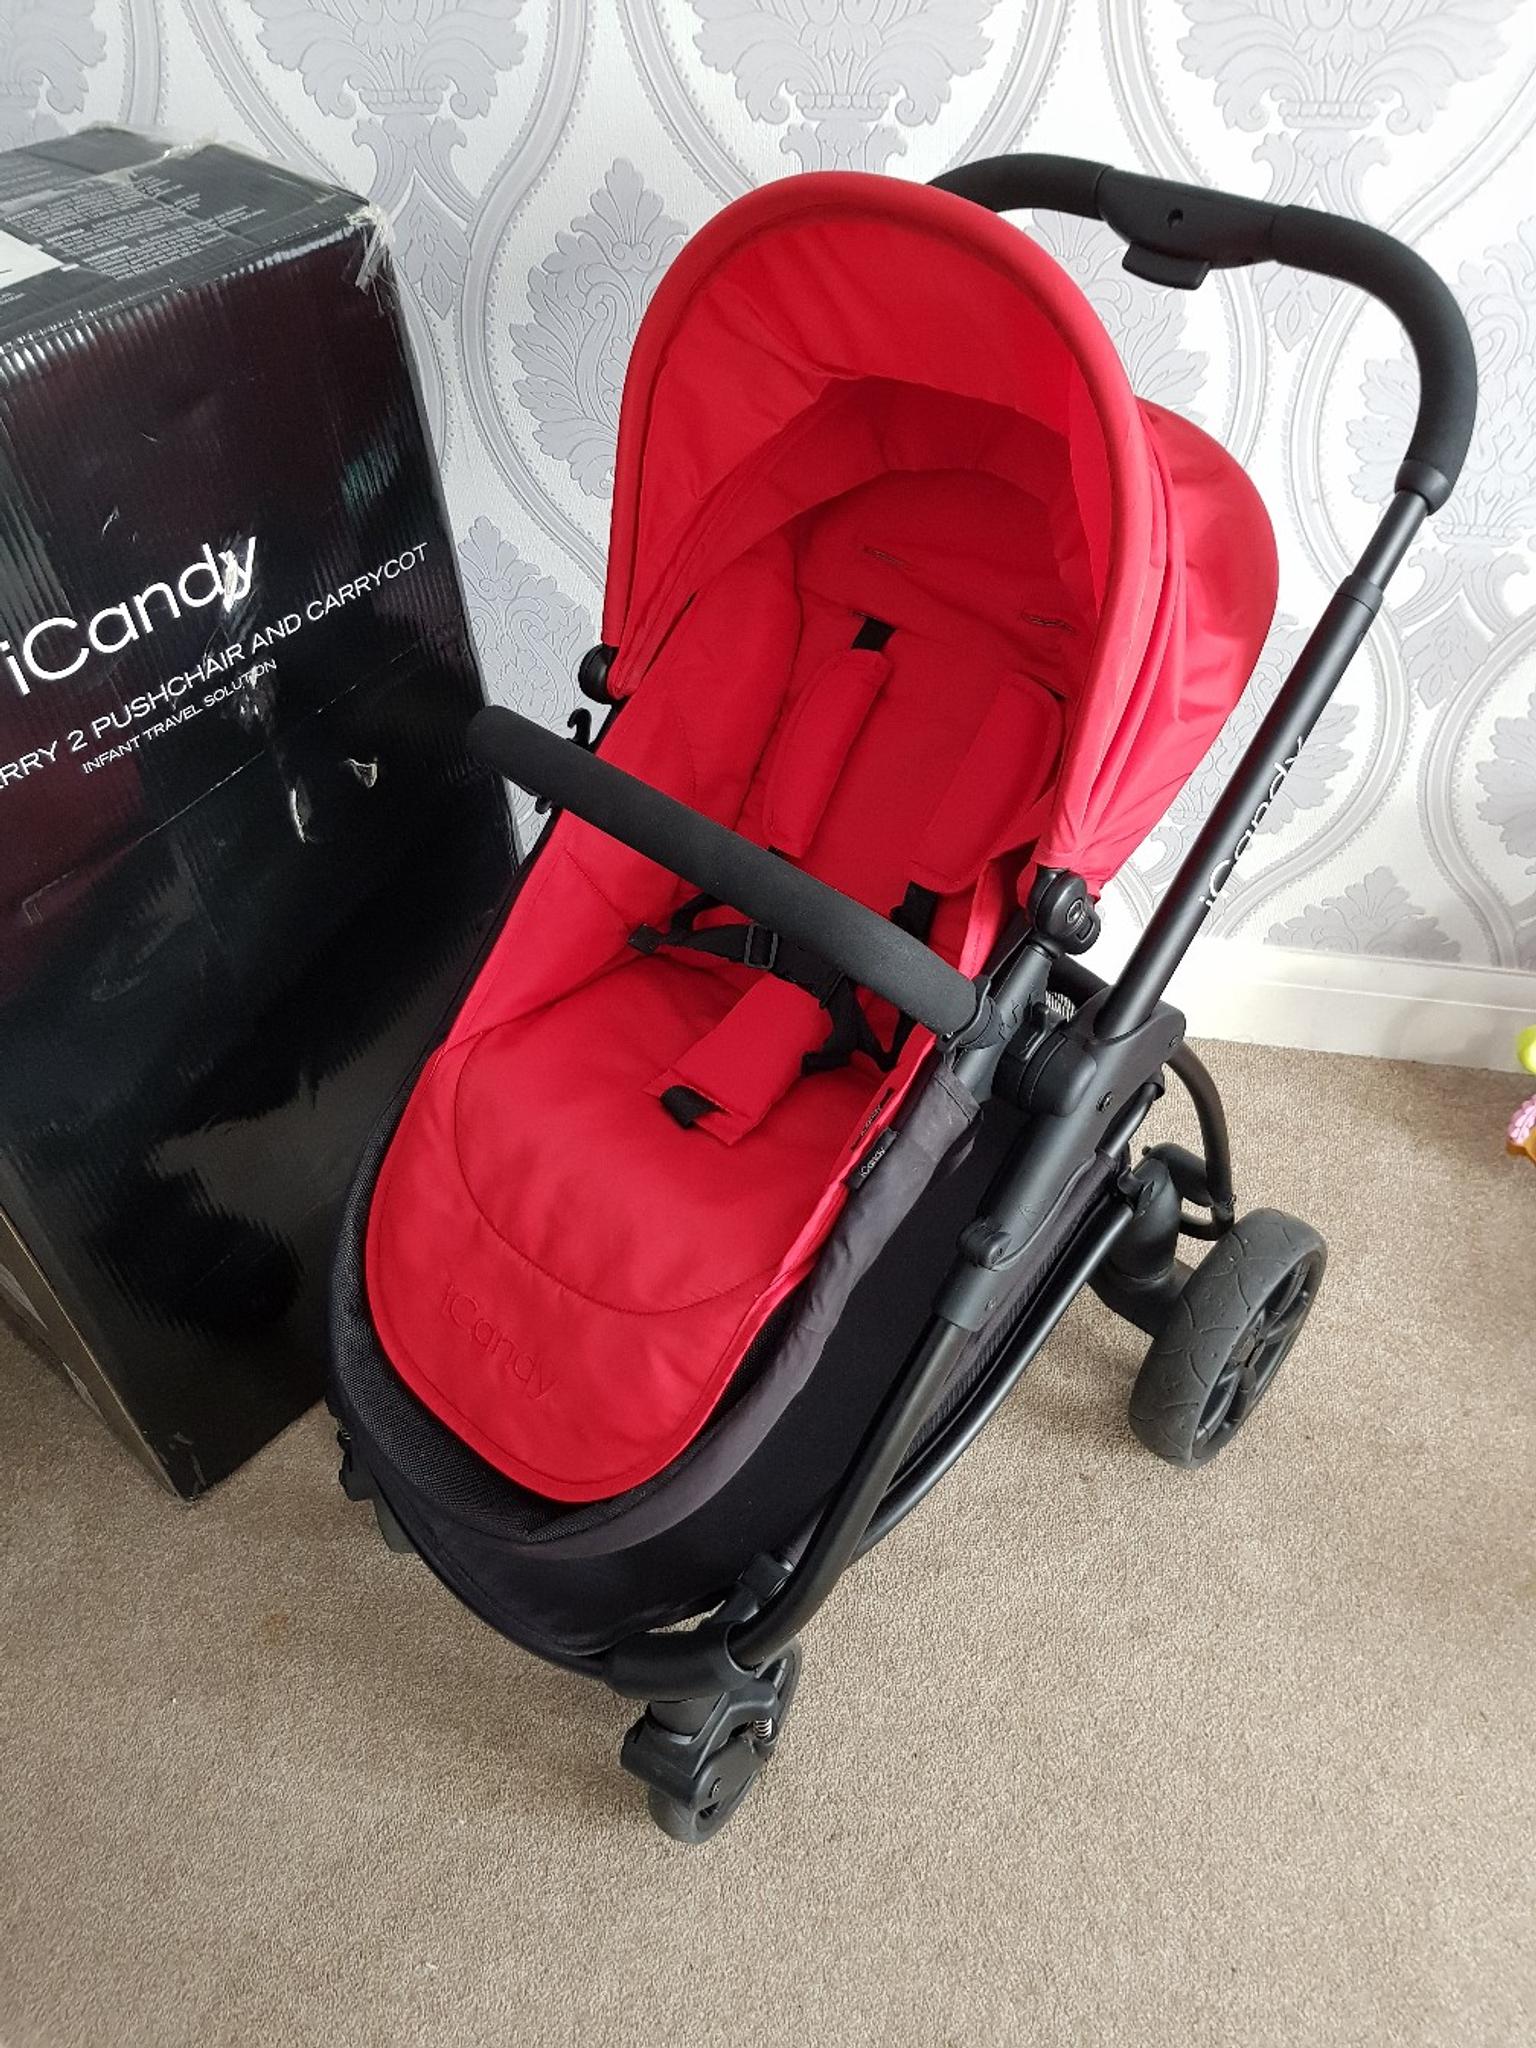 icandy strawberry 2 car seat